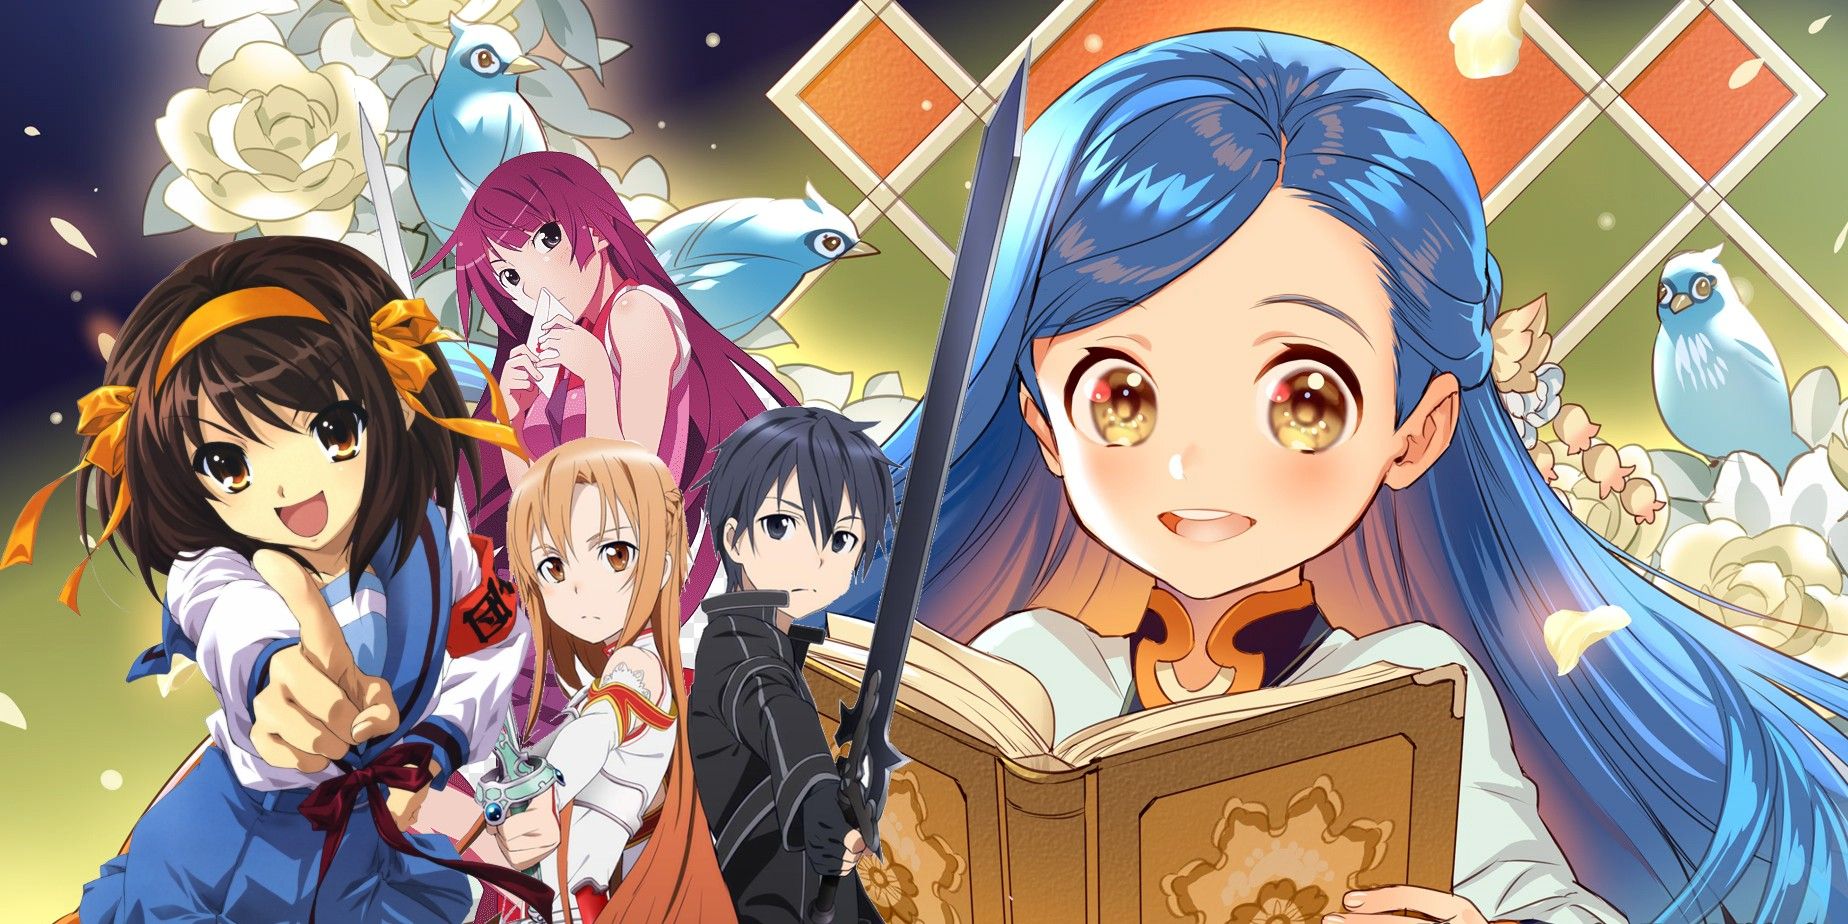 Light Novels: The Best Places & Series for Anime Fans to Begin Reading